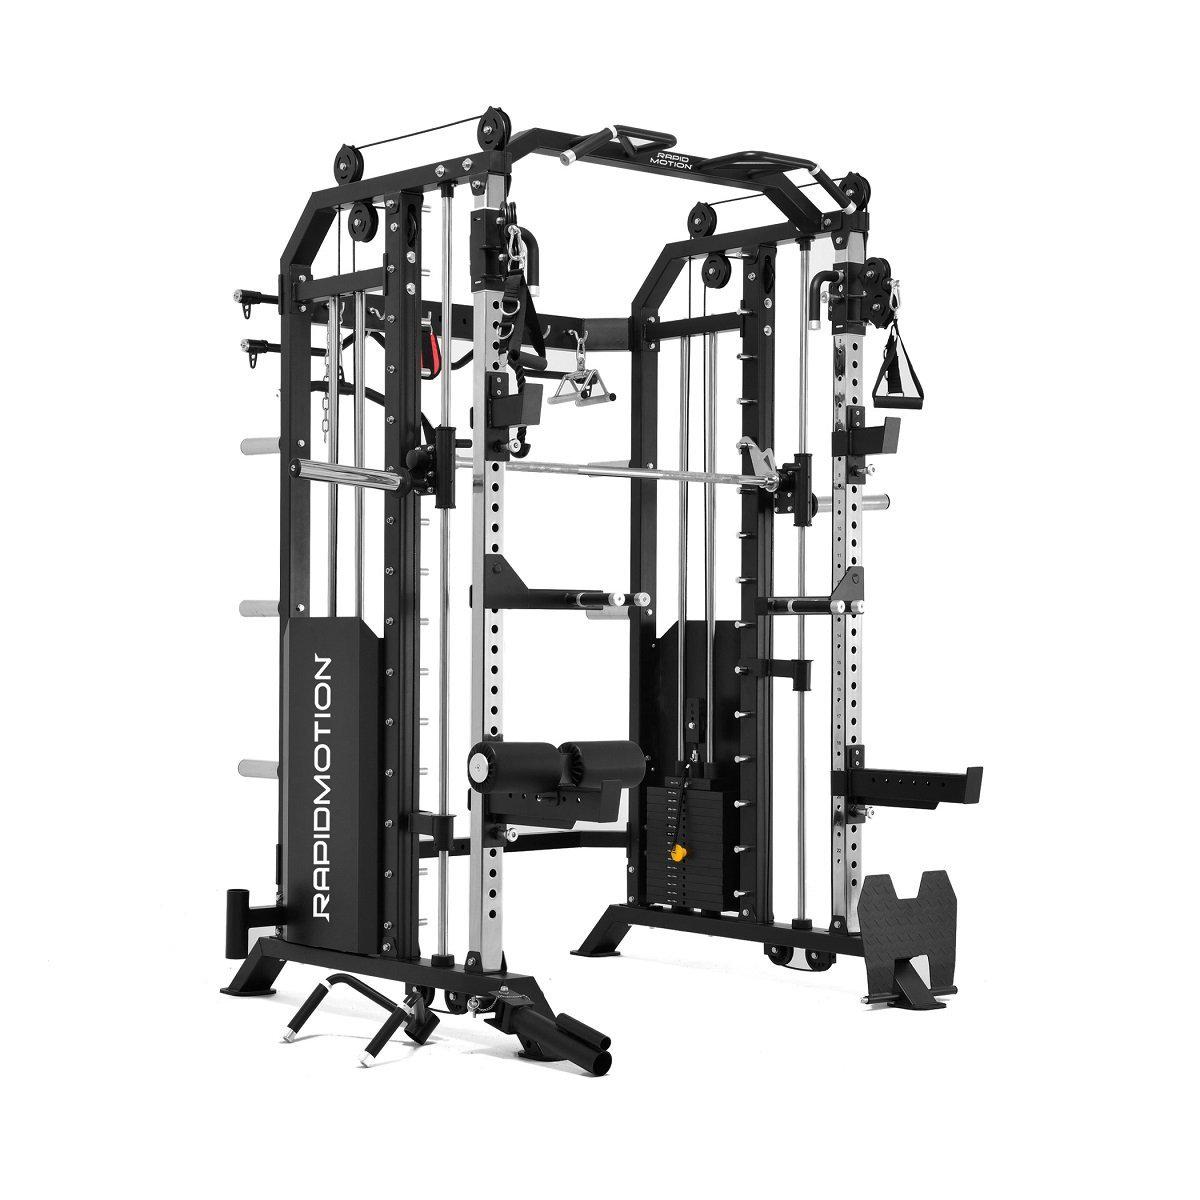 FT1007 Rapid Motion Commercial 3-in-1 Trainer-Commercial Multi-Functional Trainers-Gym Direct